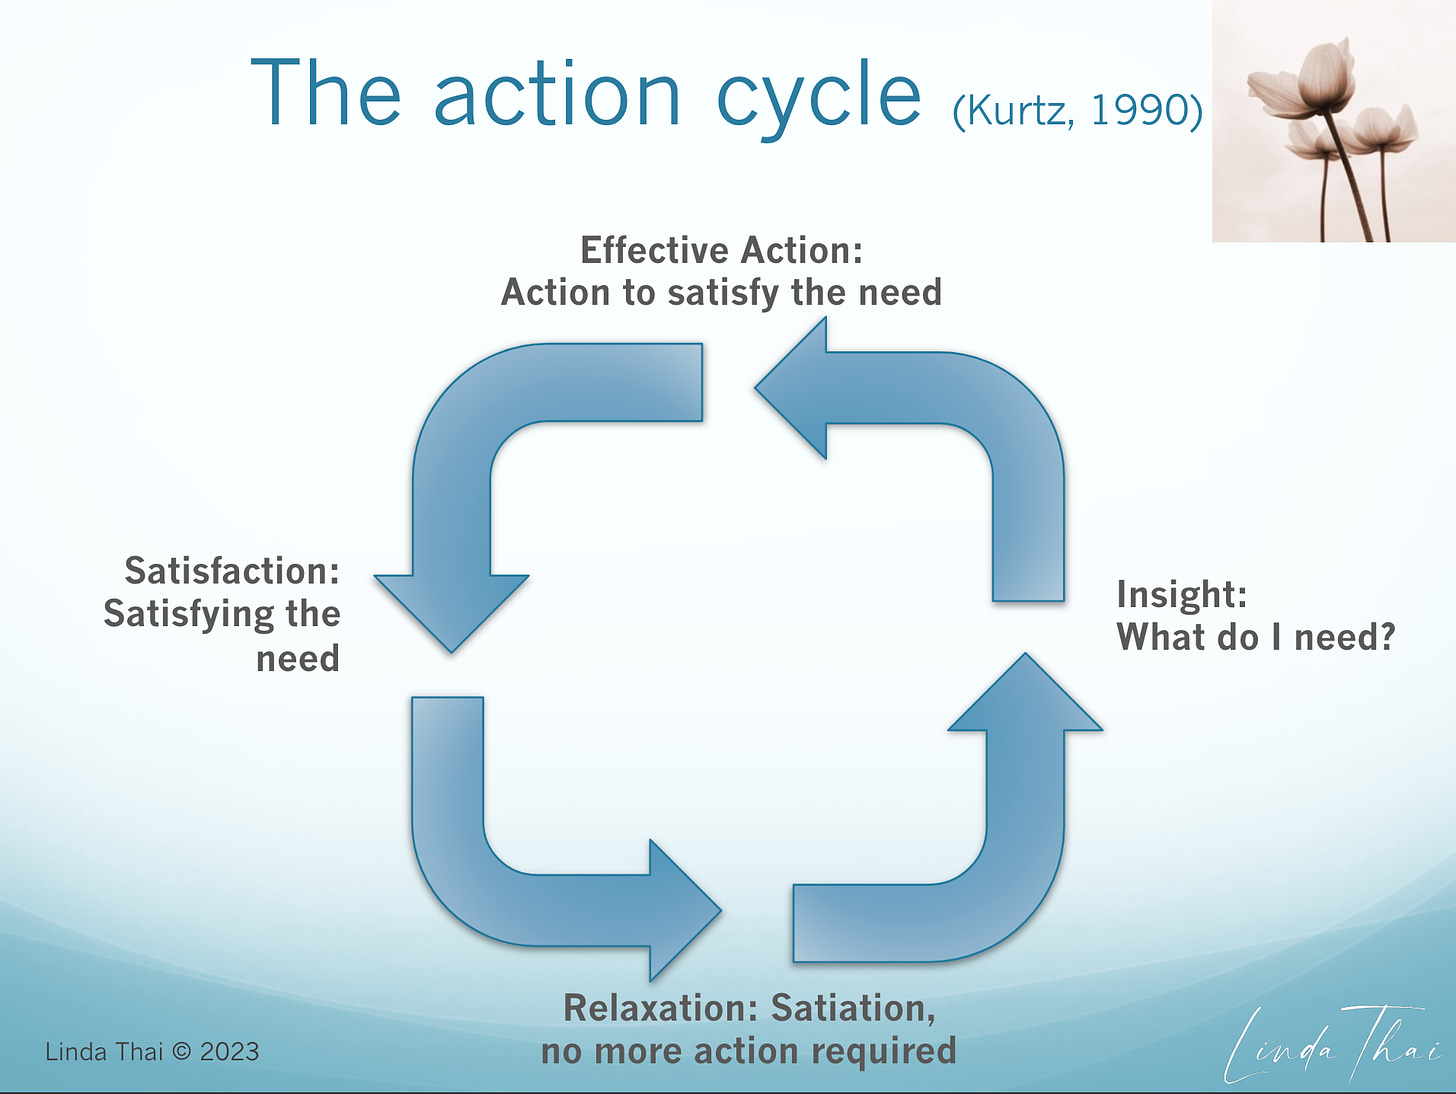 The Action Cycle (Kurtz): 1. What Do I Need? 2. Action to satisfy the need, 3. Satisfying the need, 4. Relaxation